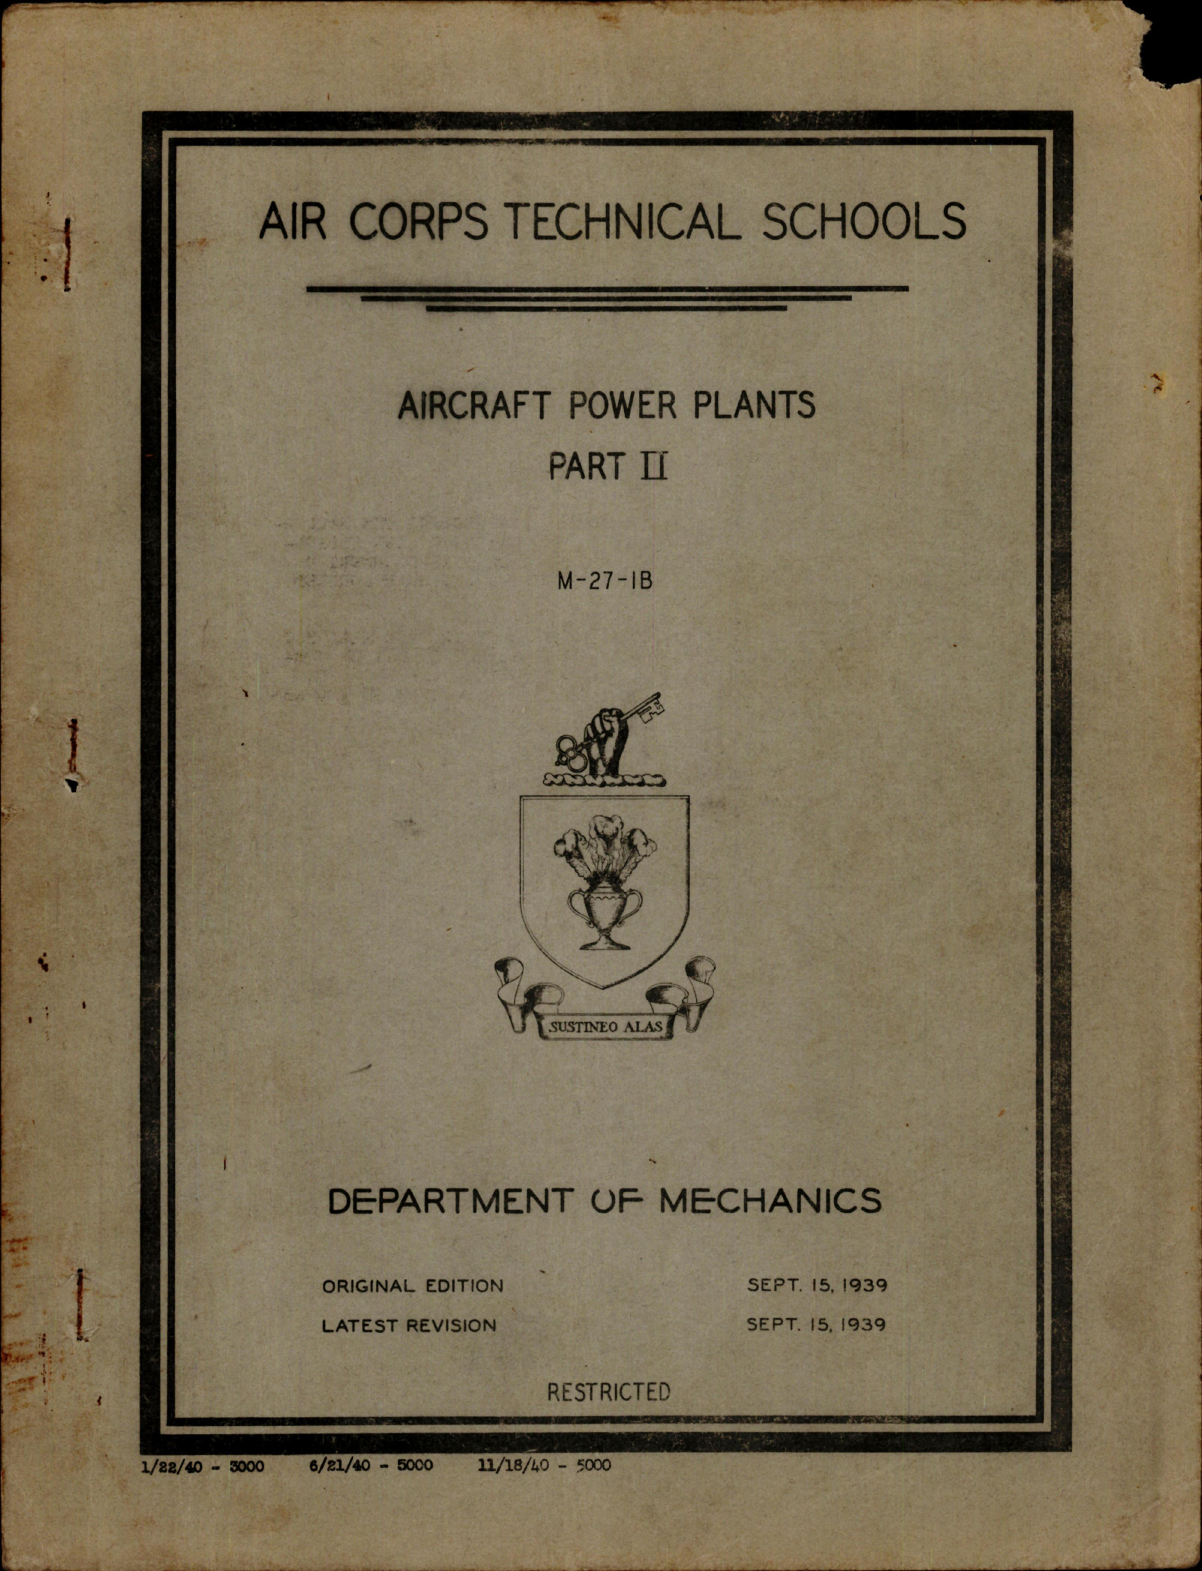 Sample page 1 from AirCorps Library document: Air Corps Technical Schools - Aircraft Power Plants Part II